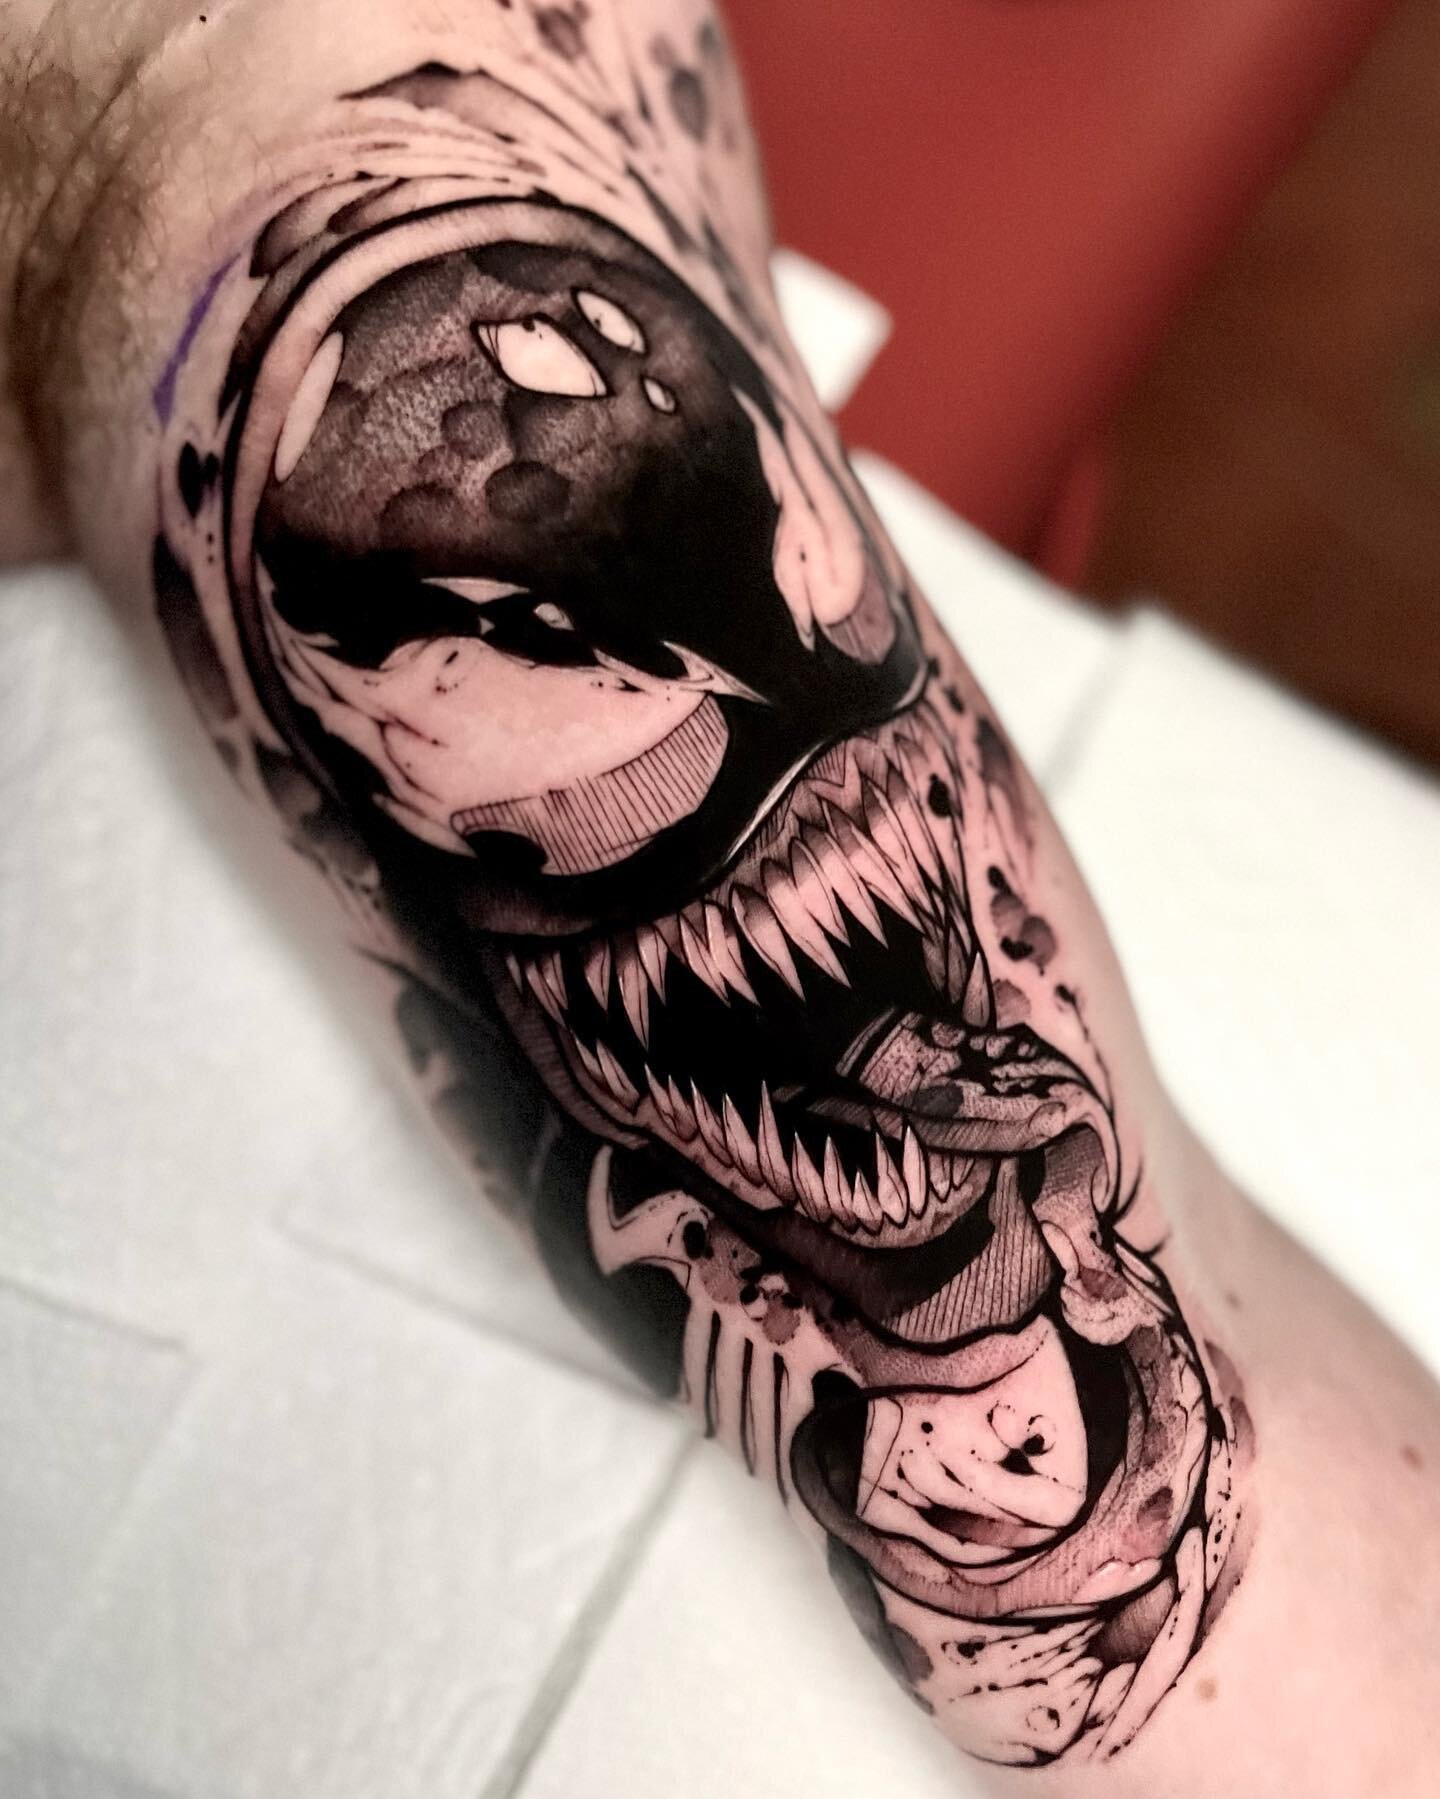 Venom, with the cute smile! I have always thought Venom was one of the coolest comic book characters, as just a really gross beefy version of Spider-Man that eats people. Thanks for letting me put this on your bicep Nick!!
.
.
I&rsquo;m gonna try and